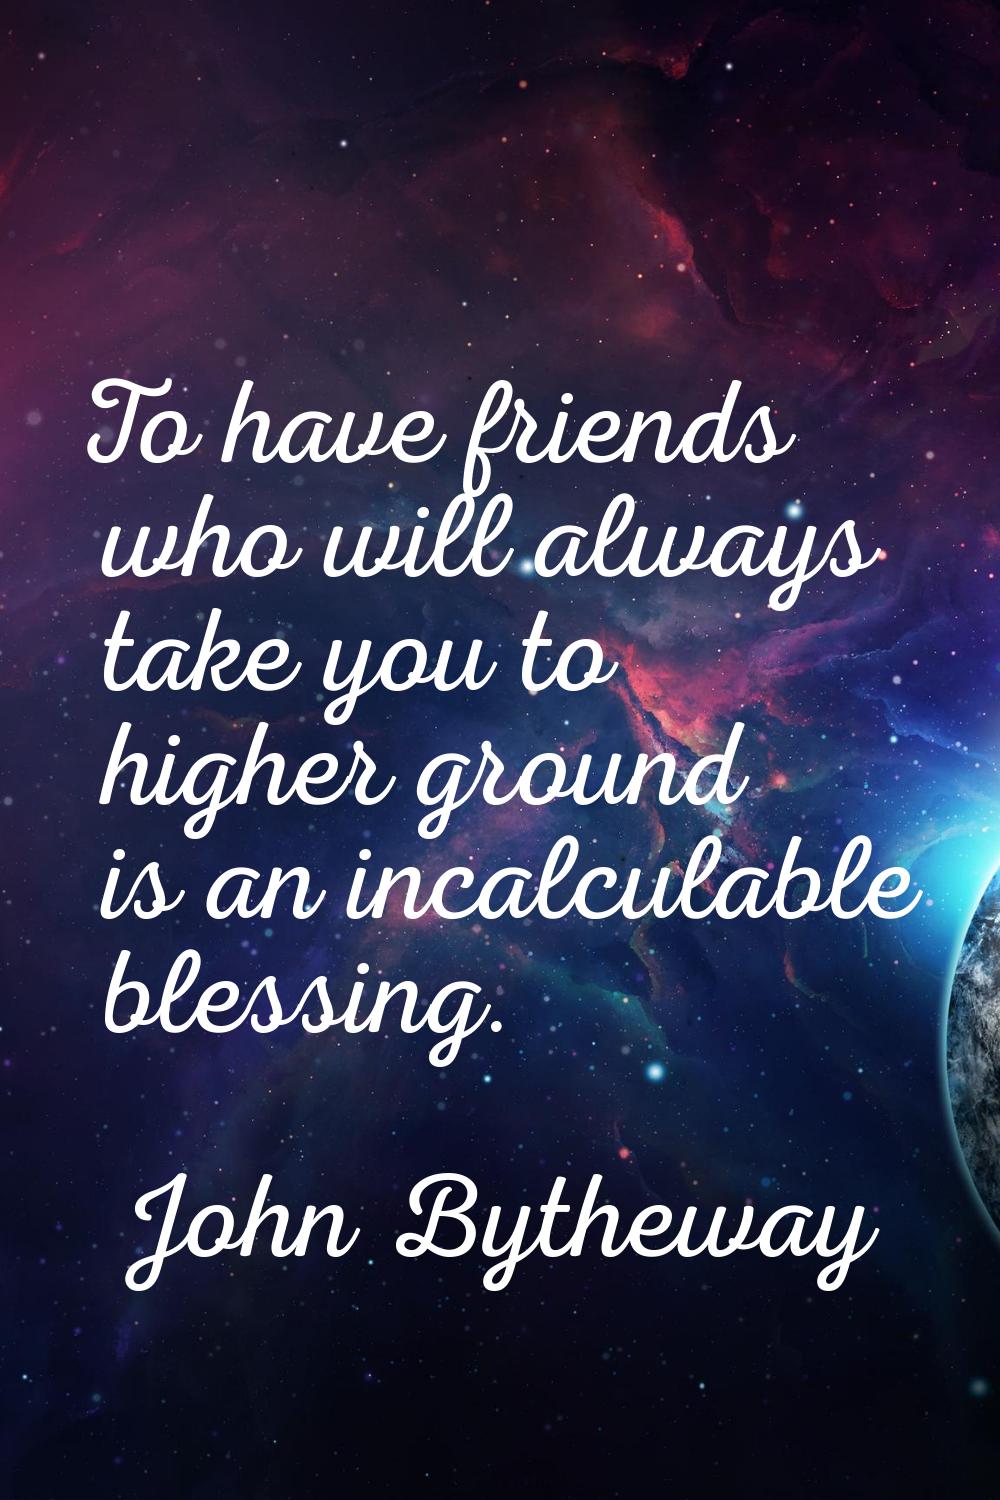 To have friends who will always take you to higher ground is an incalculable blessing.